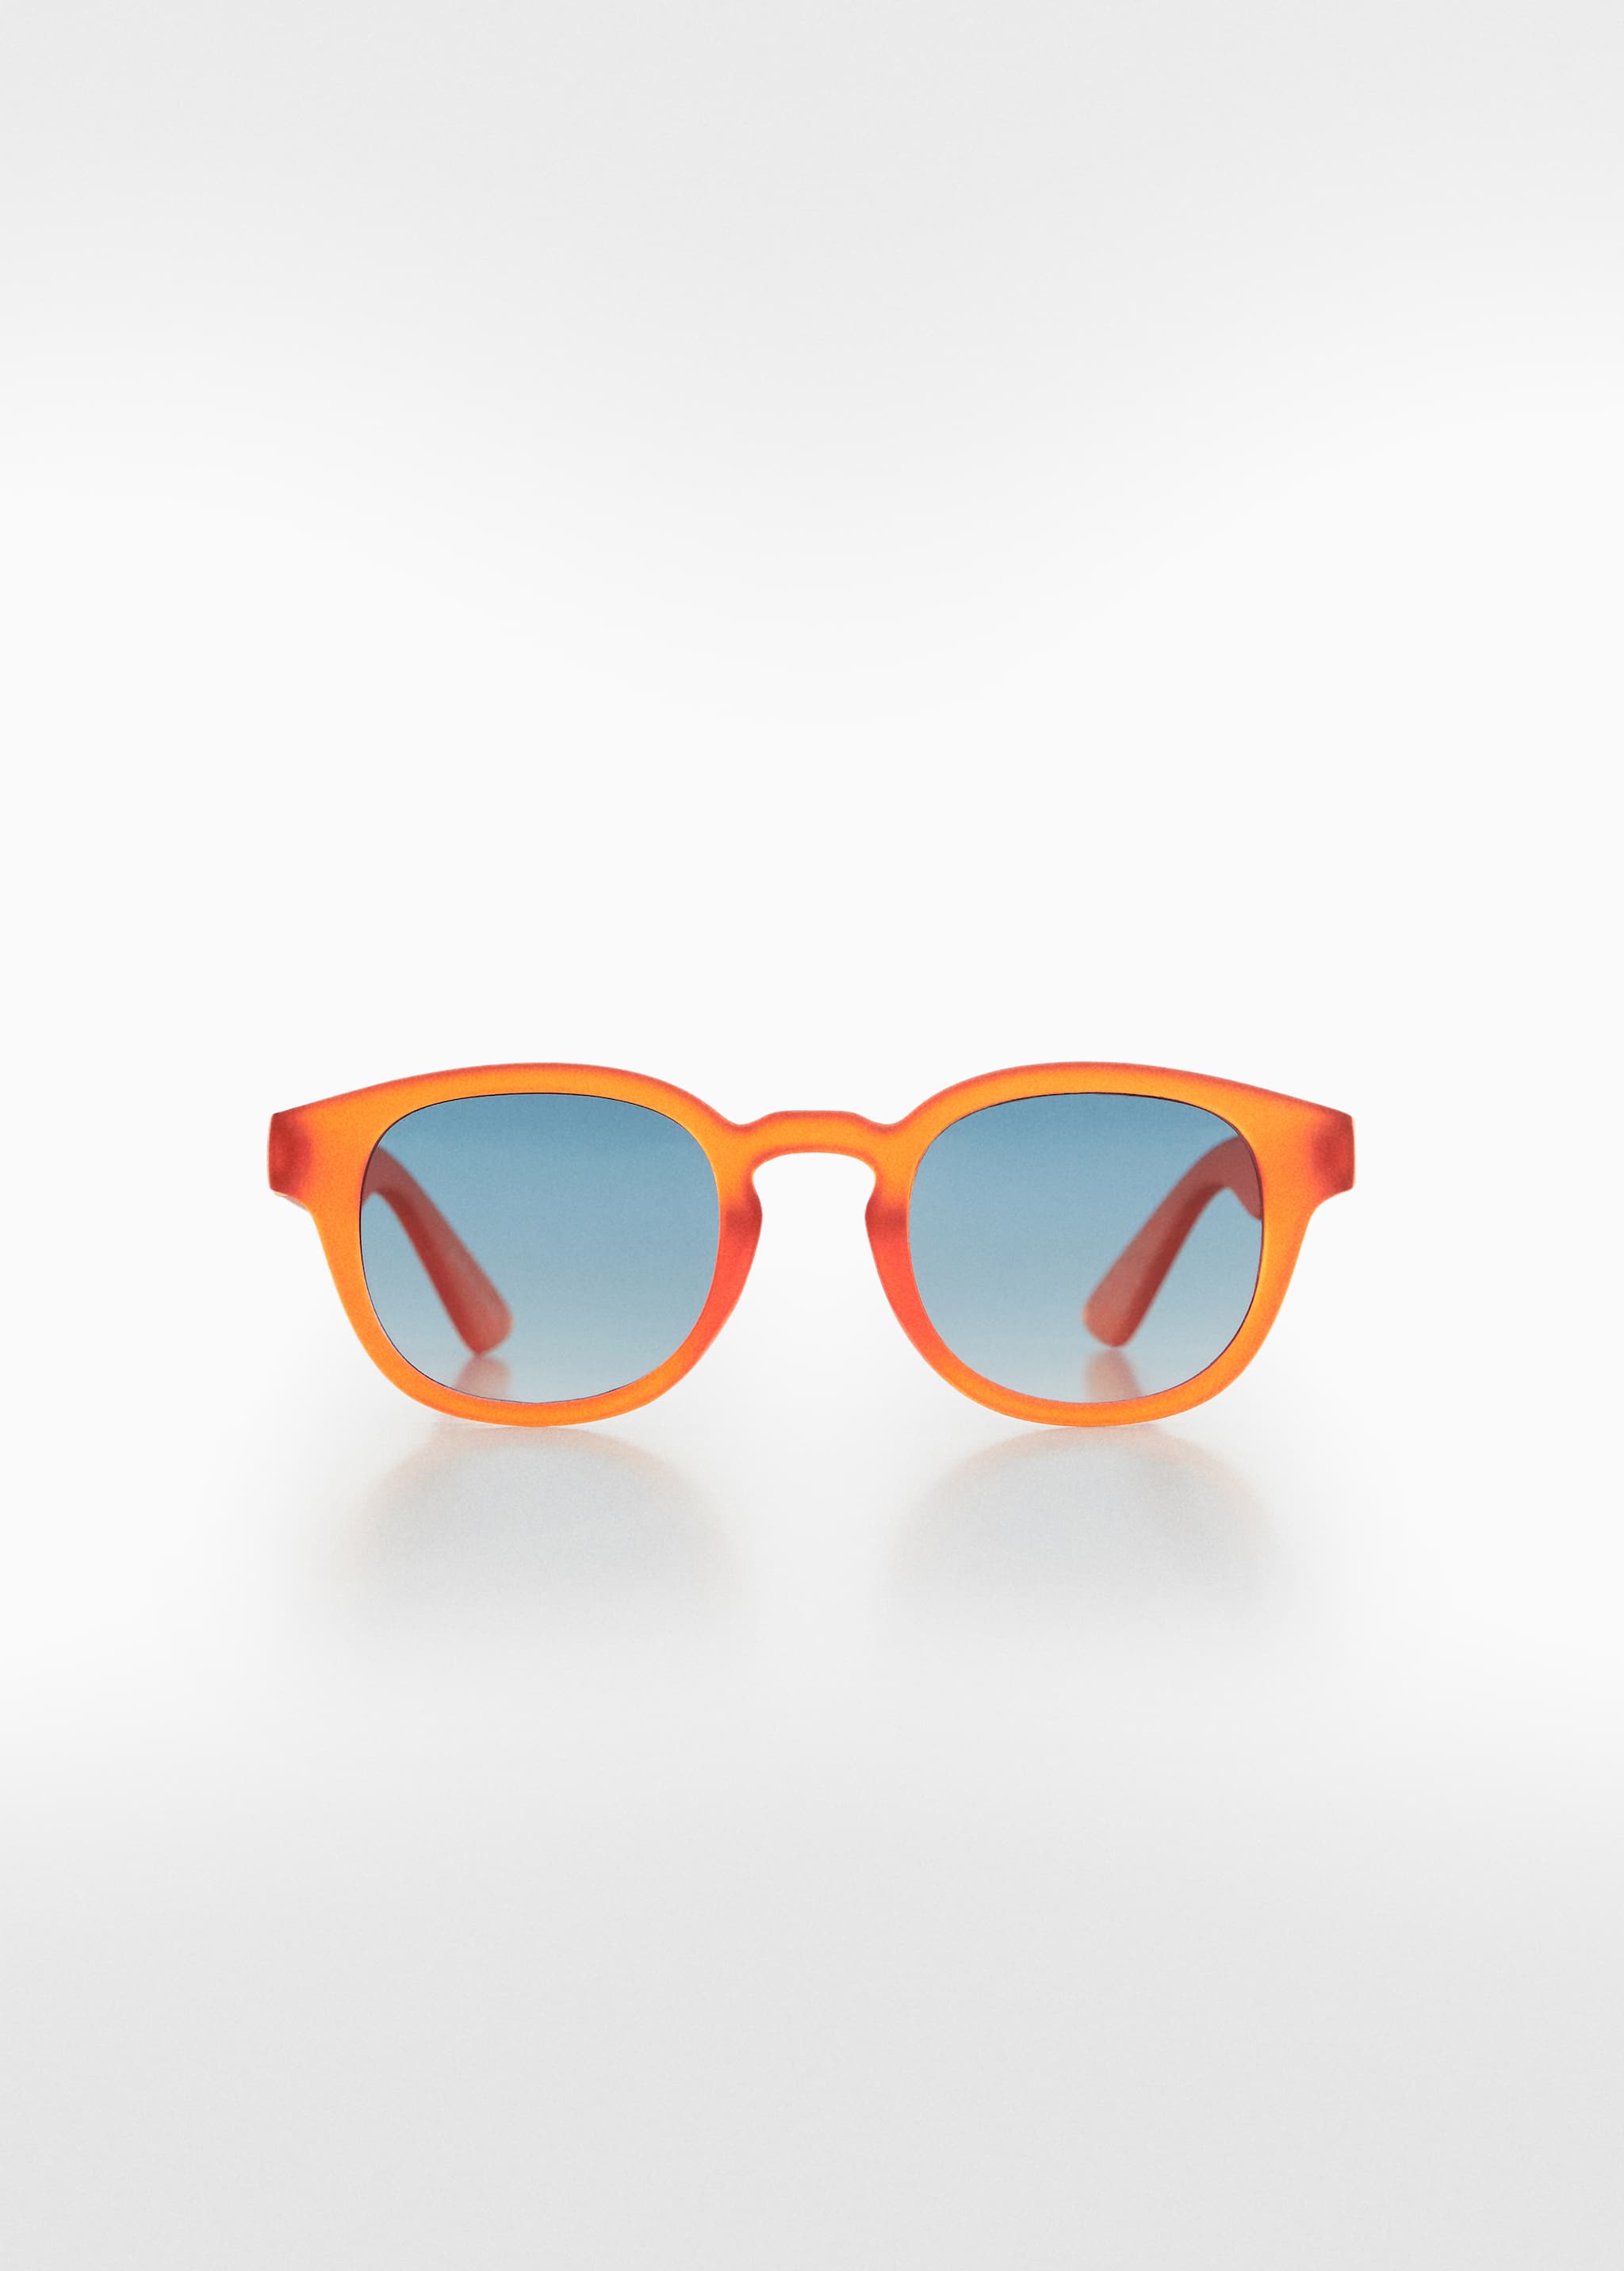 Acetate frame sunglasses - Article without model